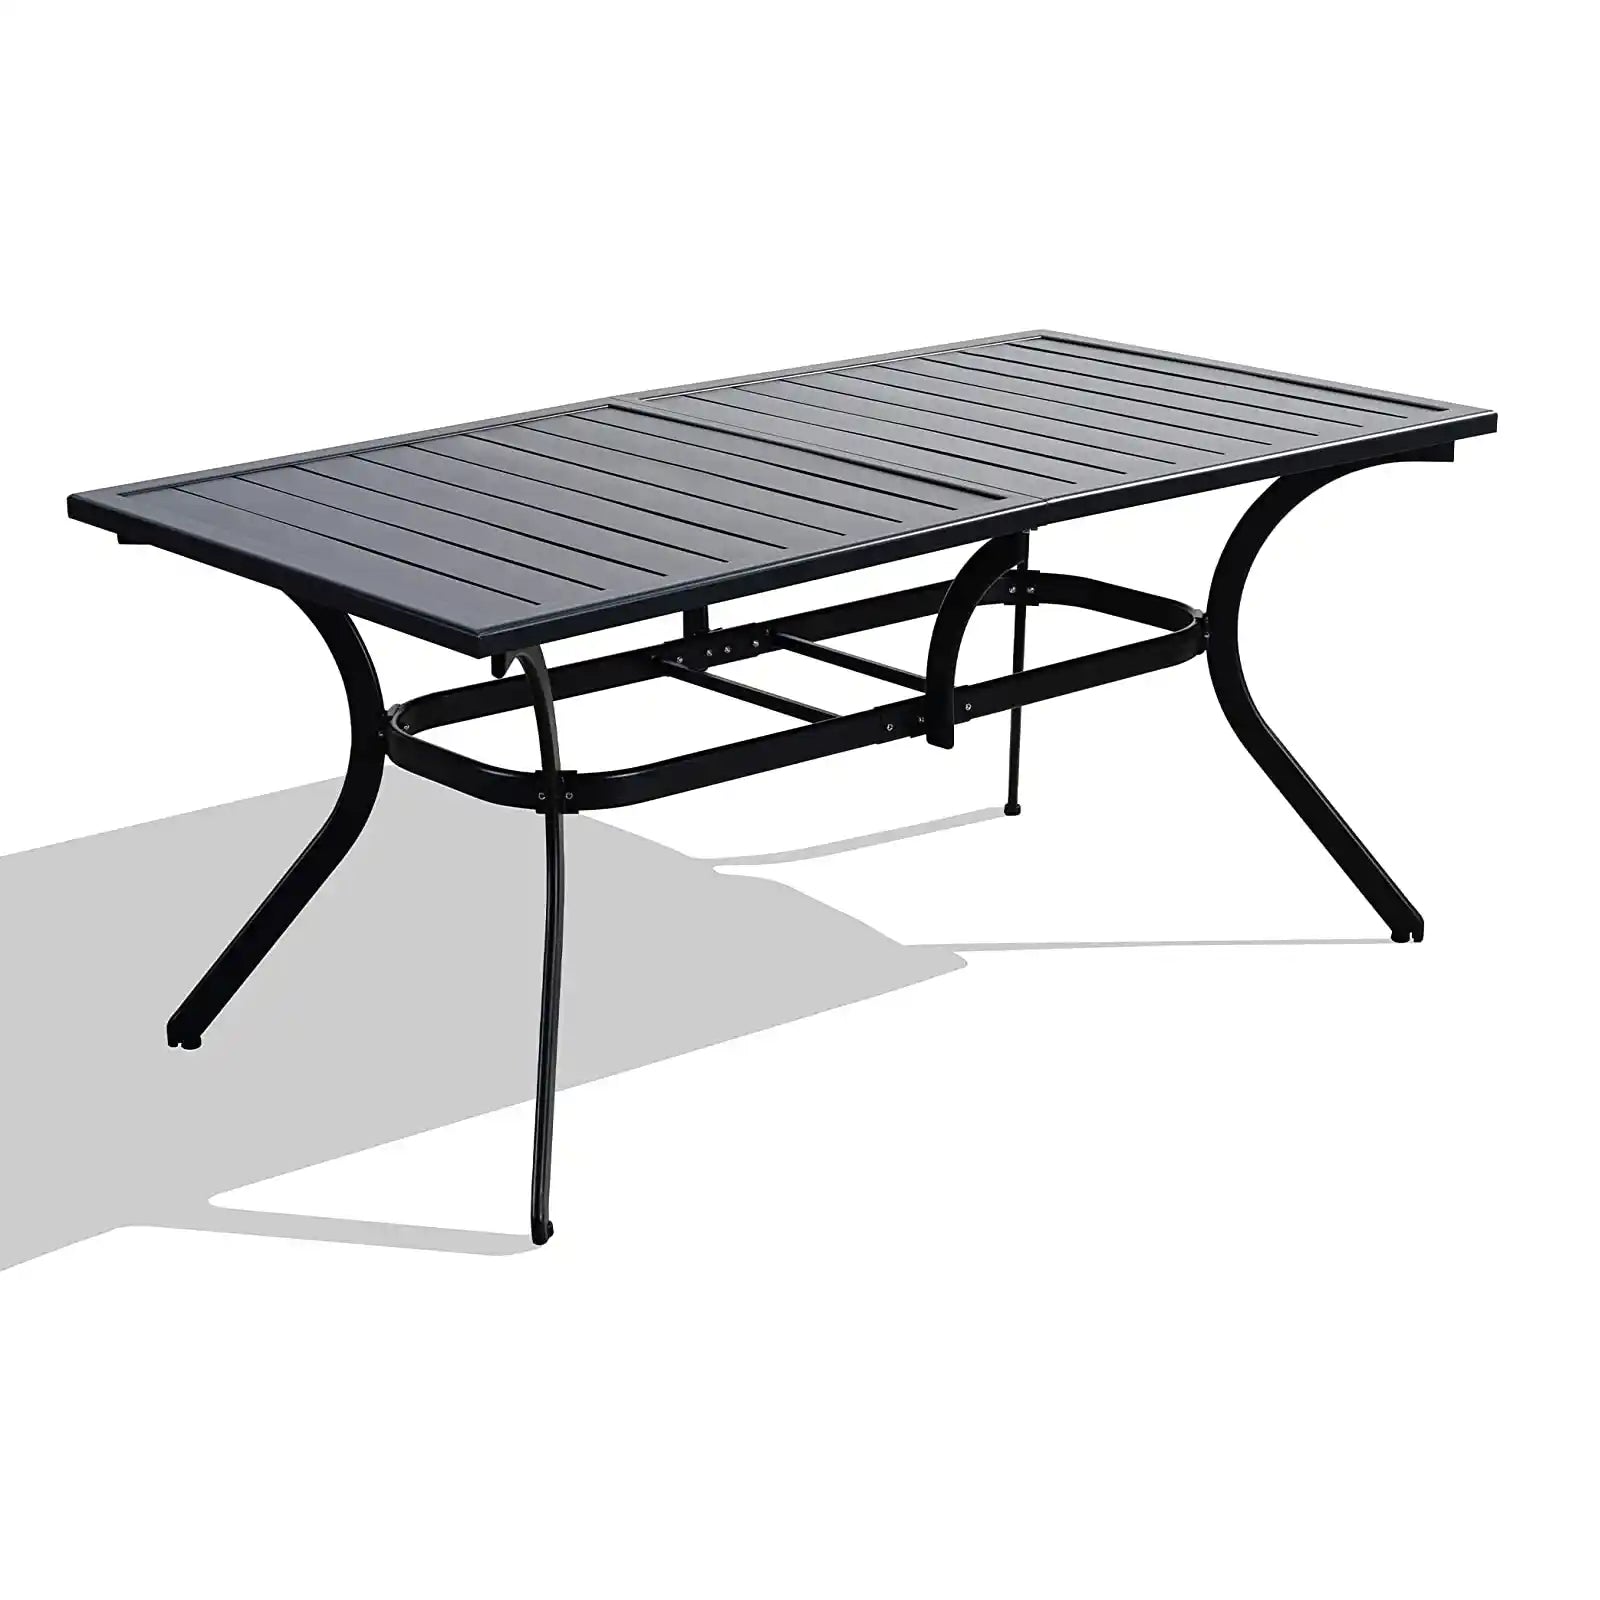 6-8 Person Outdoor Dining Table with Height Adjustable Feet and Slatted Tabletop